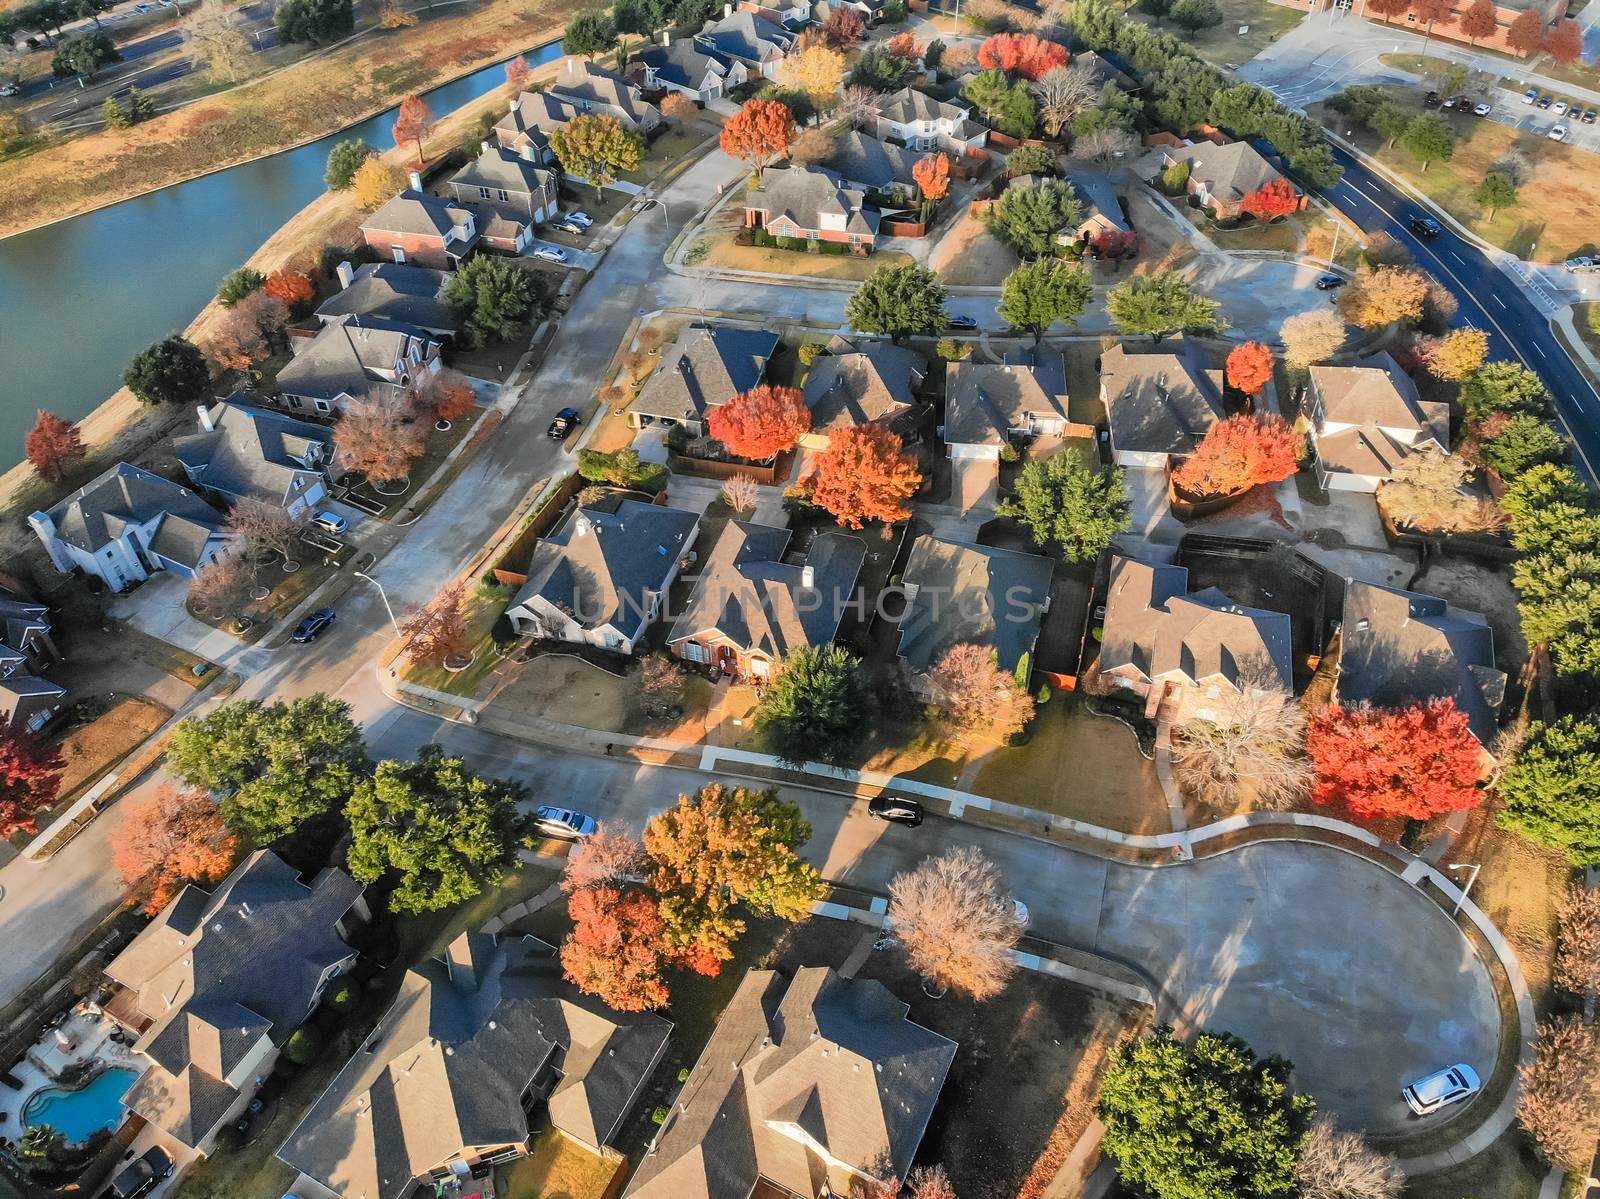 Aerial view lakefront neighborhood with cul-de-sac dead-end street near Dallas, Texas. Morning autumn season with colorful fall foliage leaves